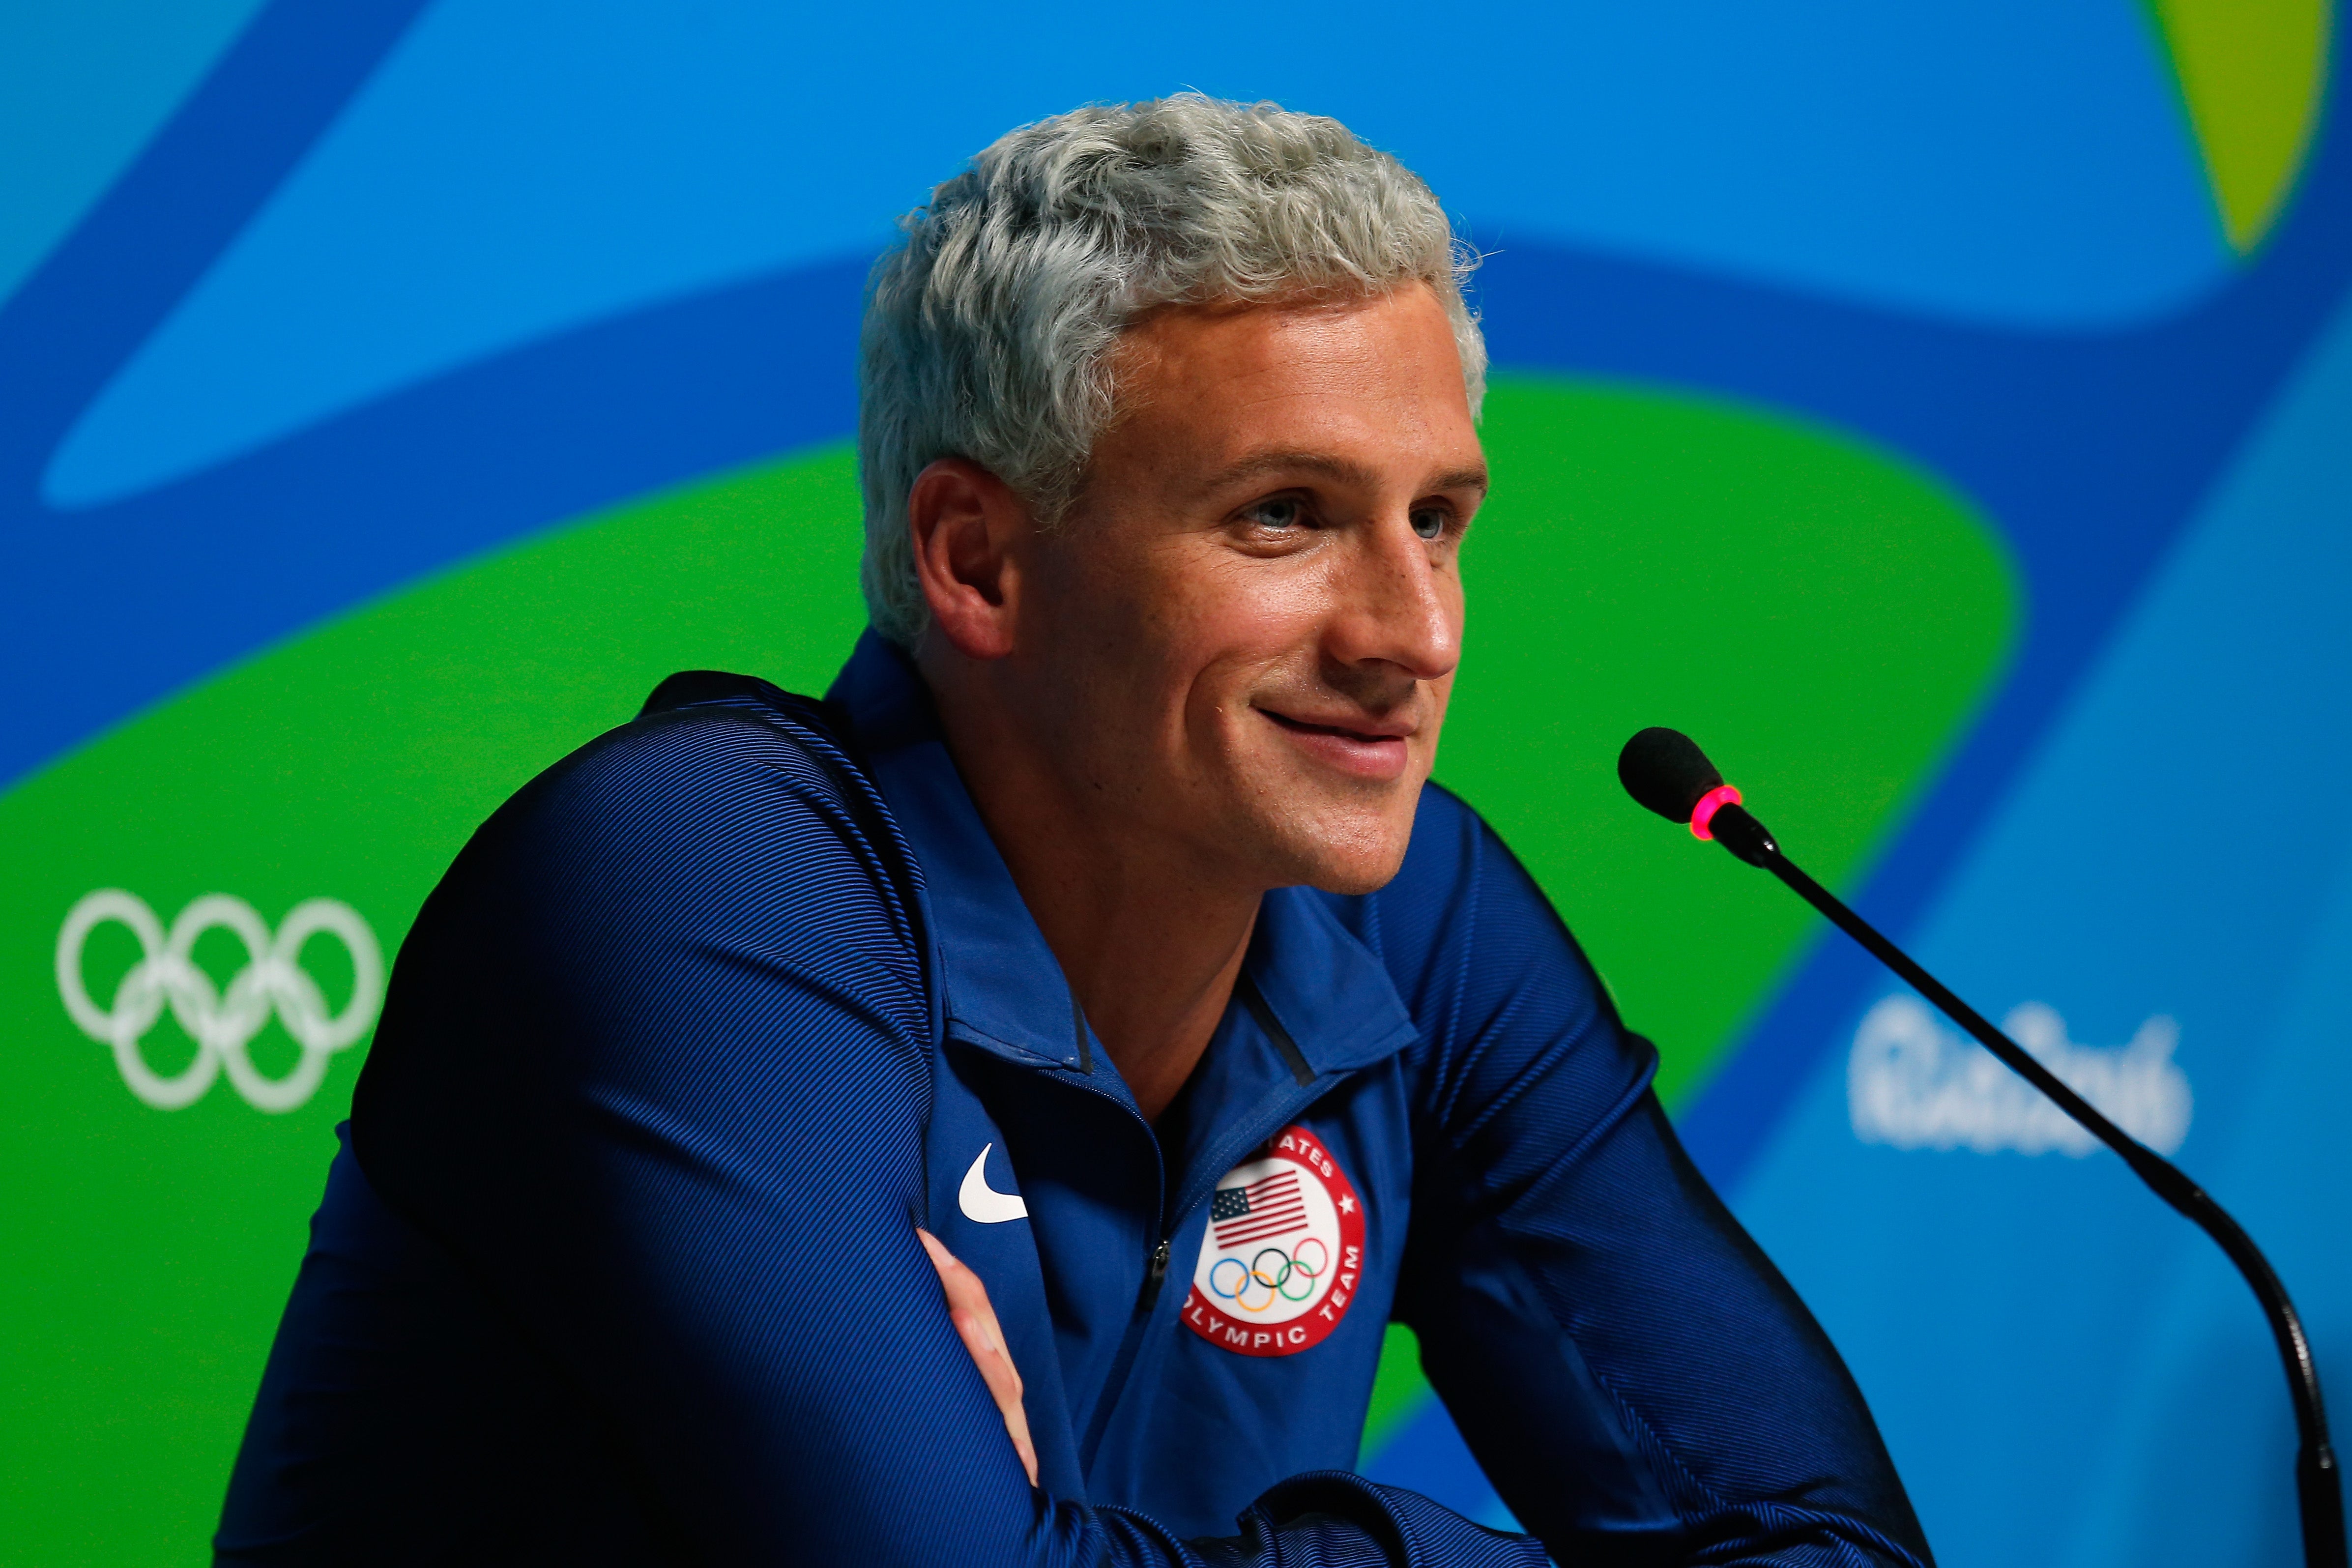 Brazilian Police Recommend Ryan Lochte and James Feigen Be Indicted for False Report
